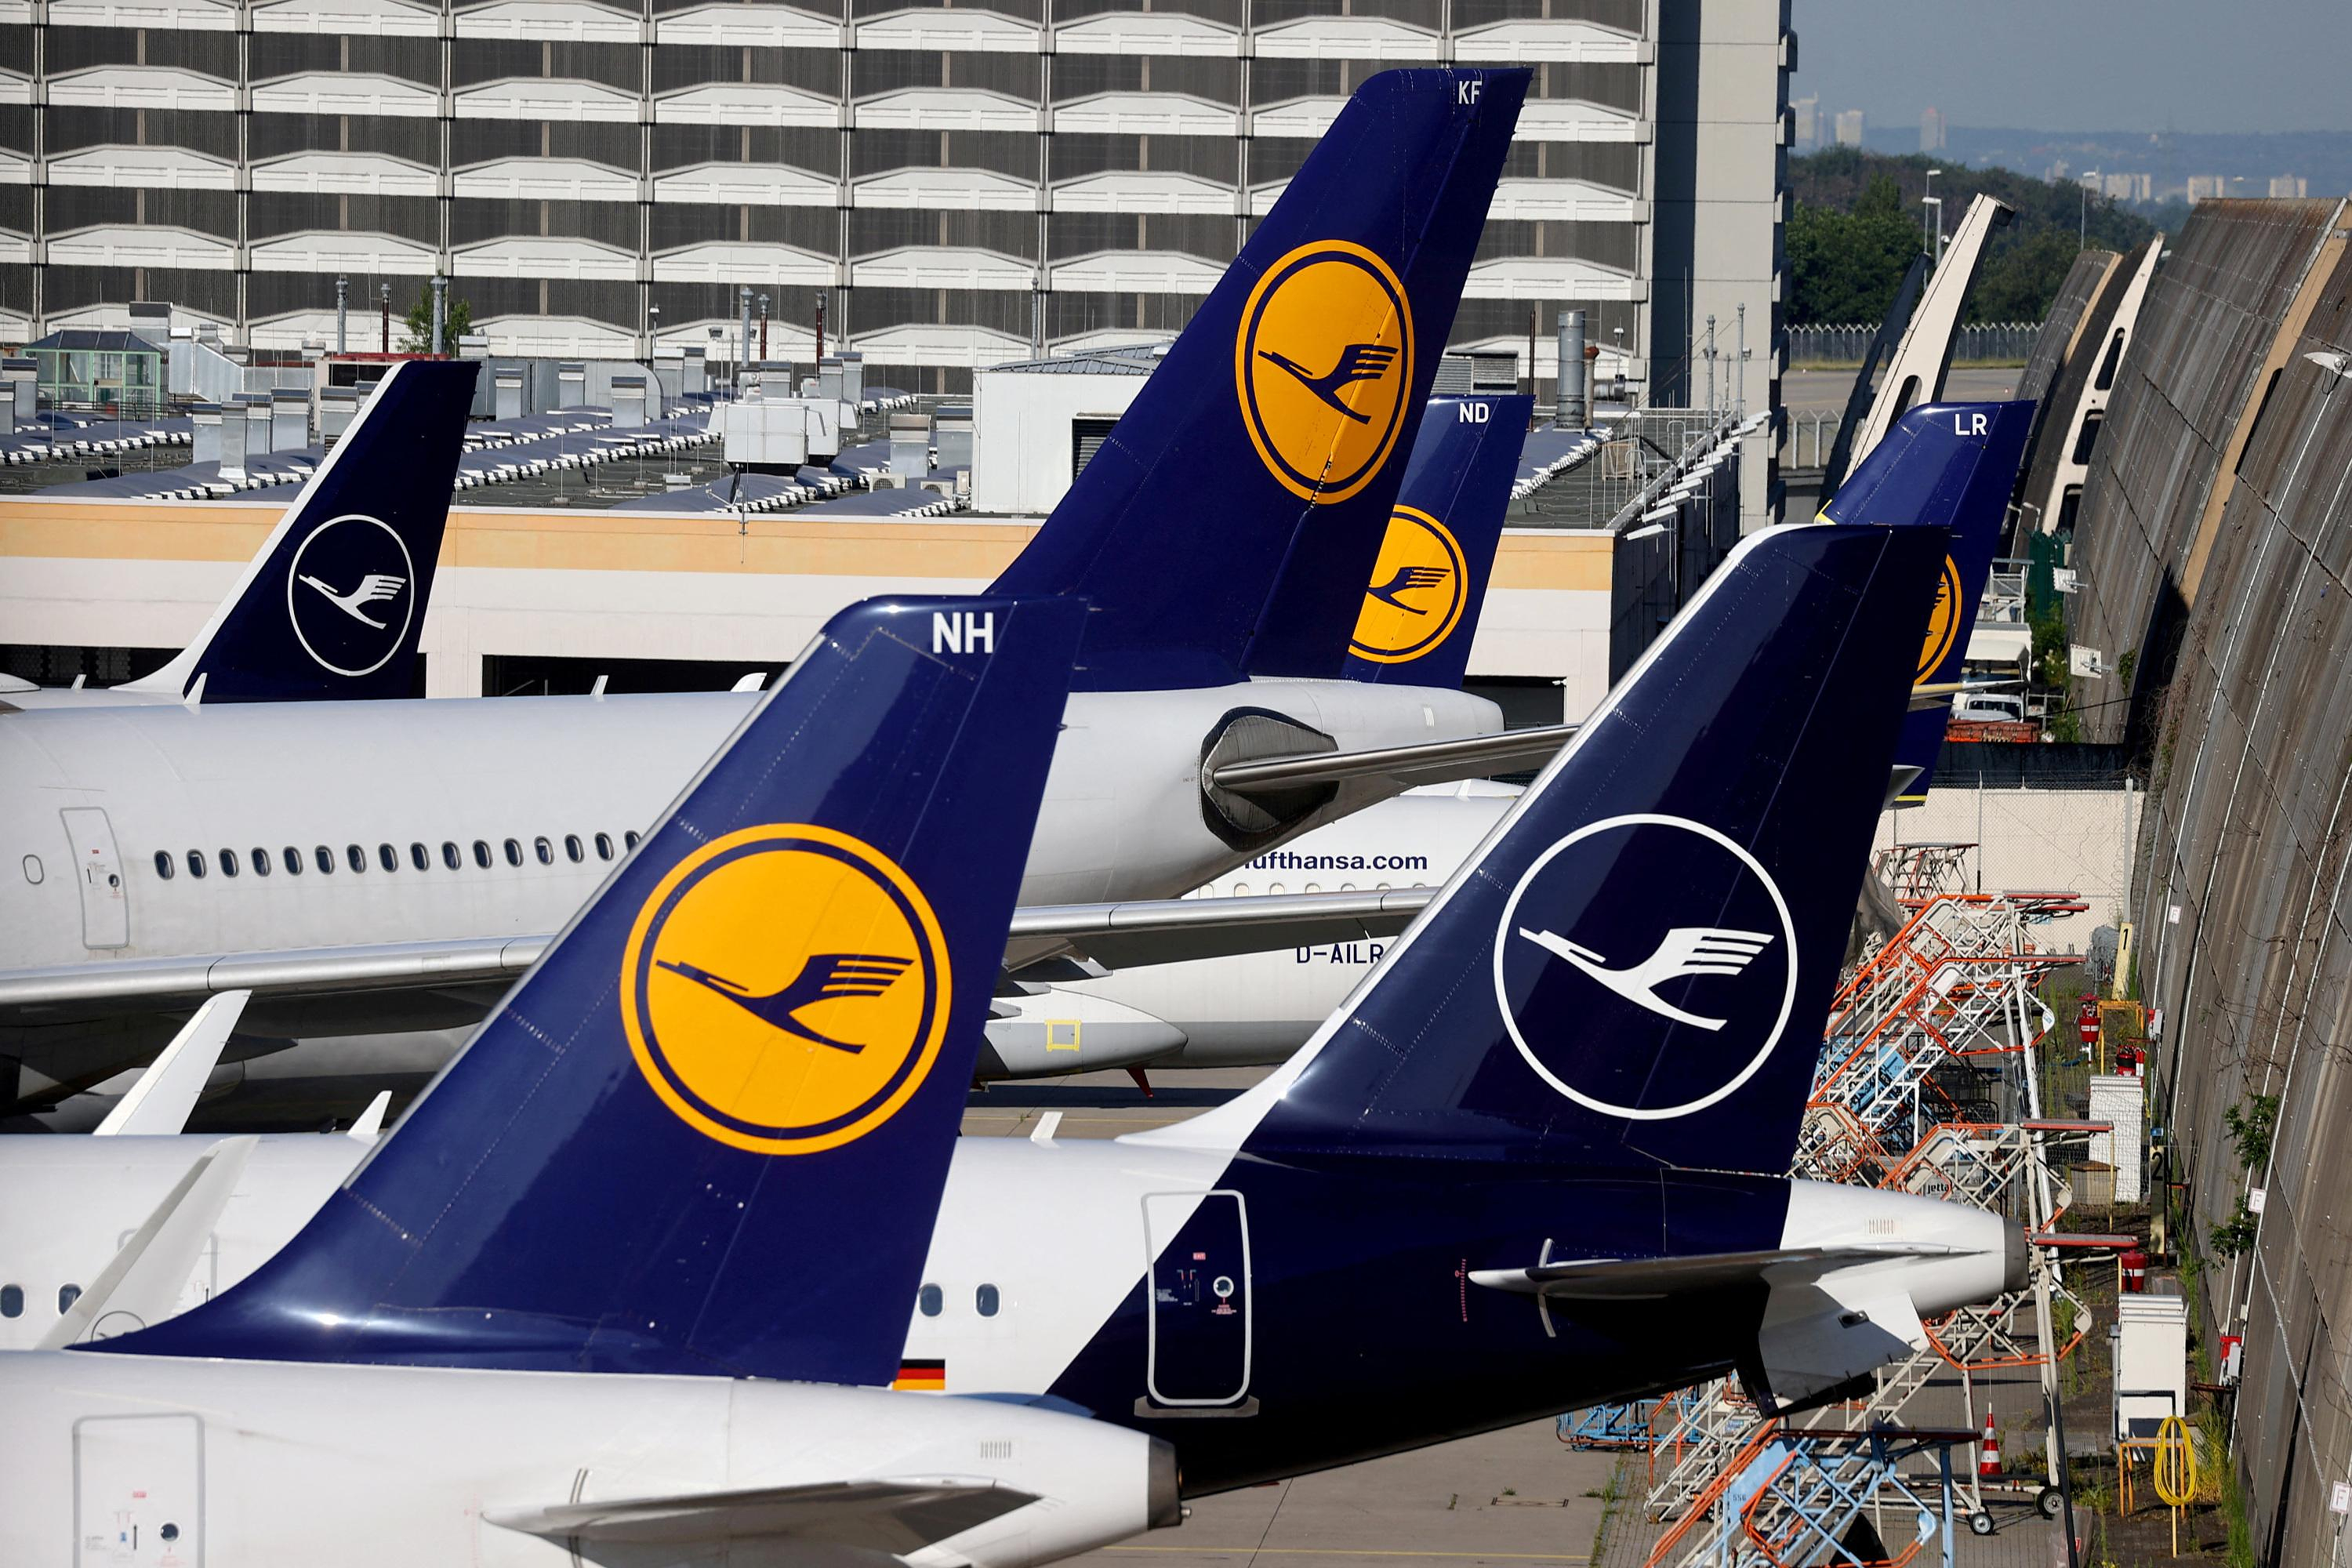 Lufthansa: new call for ground staff strike Thursday and Friday